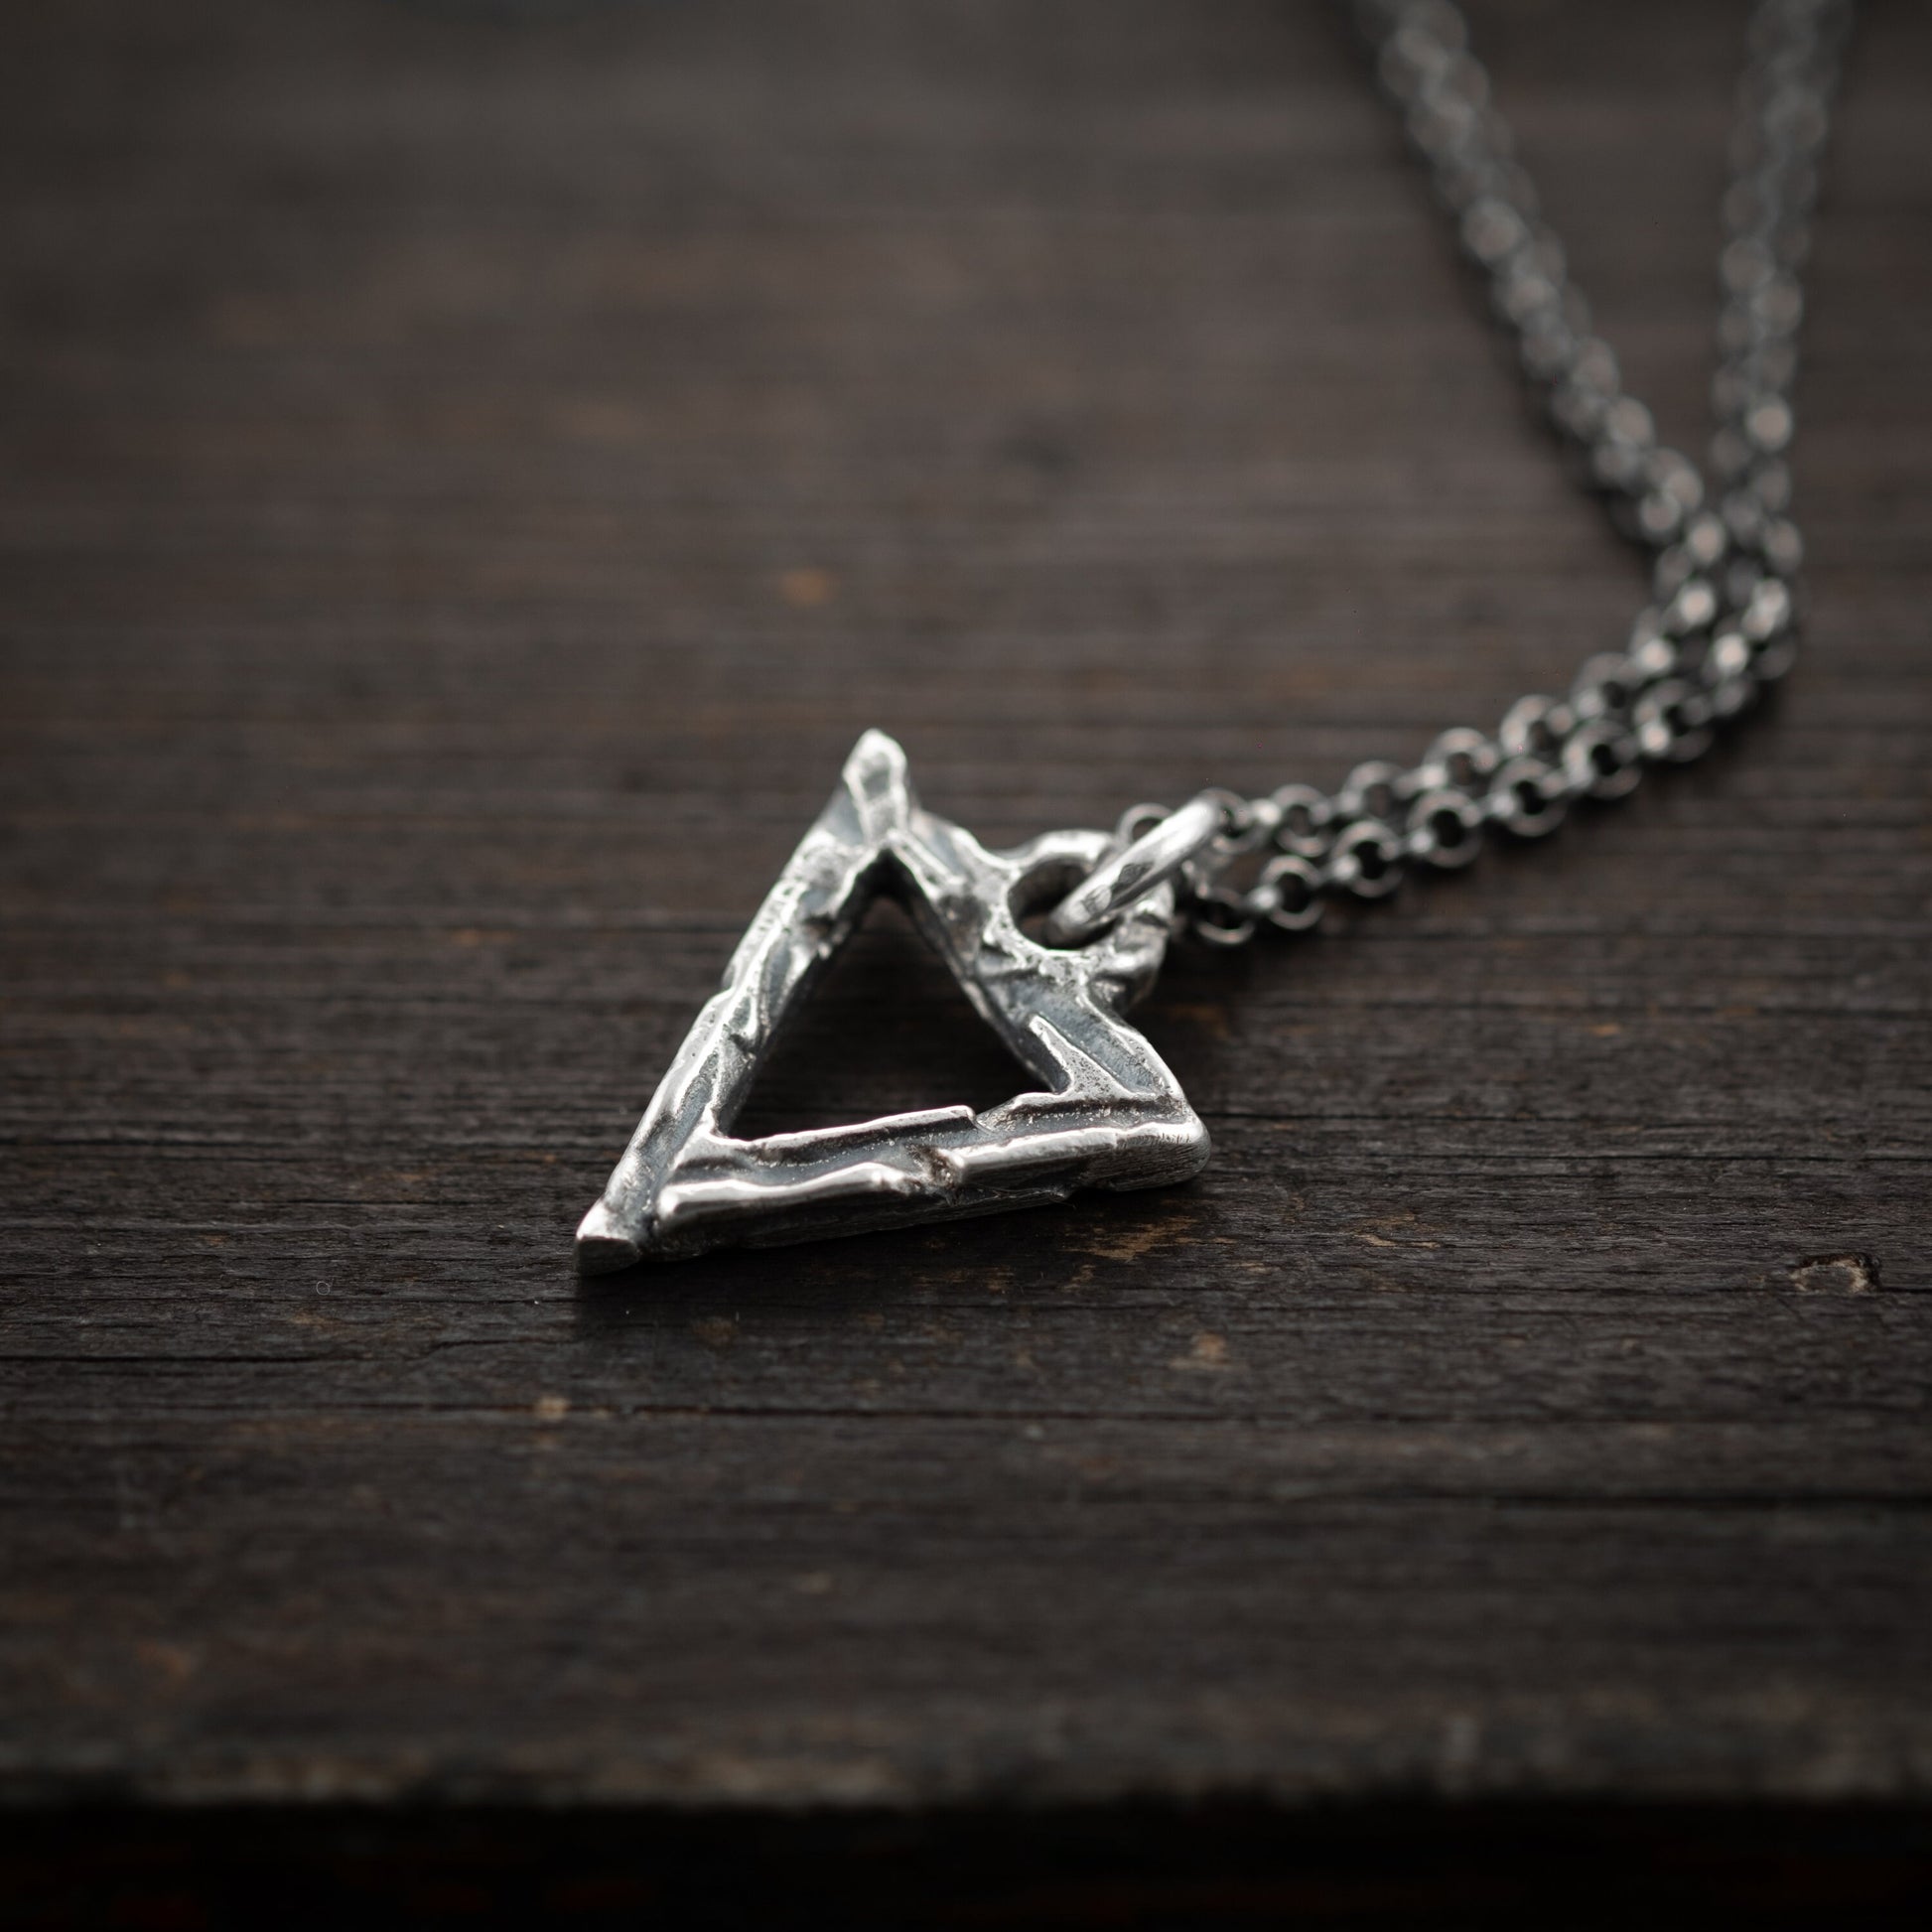 Triangle Silver Protection Amulet  Necklace, Gift for him, Gift for her, Mens gift, Boyfriend Christmas gift, Husbant gift, Gift for him